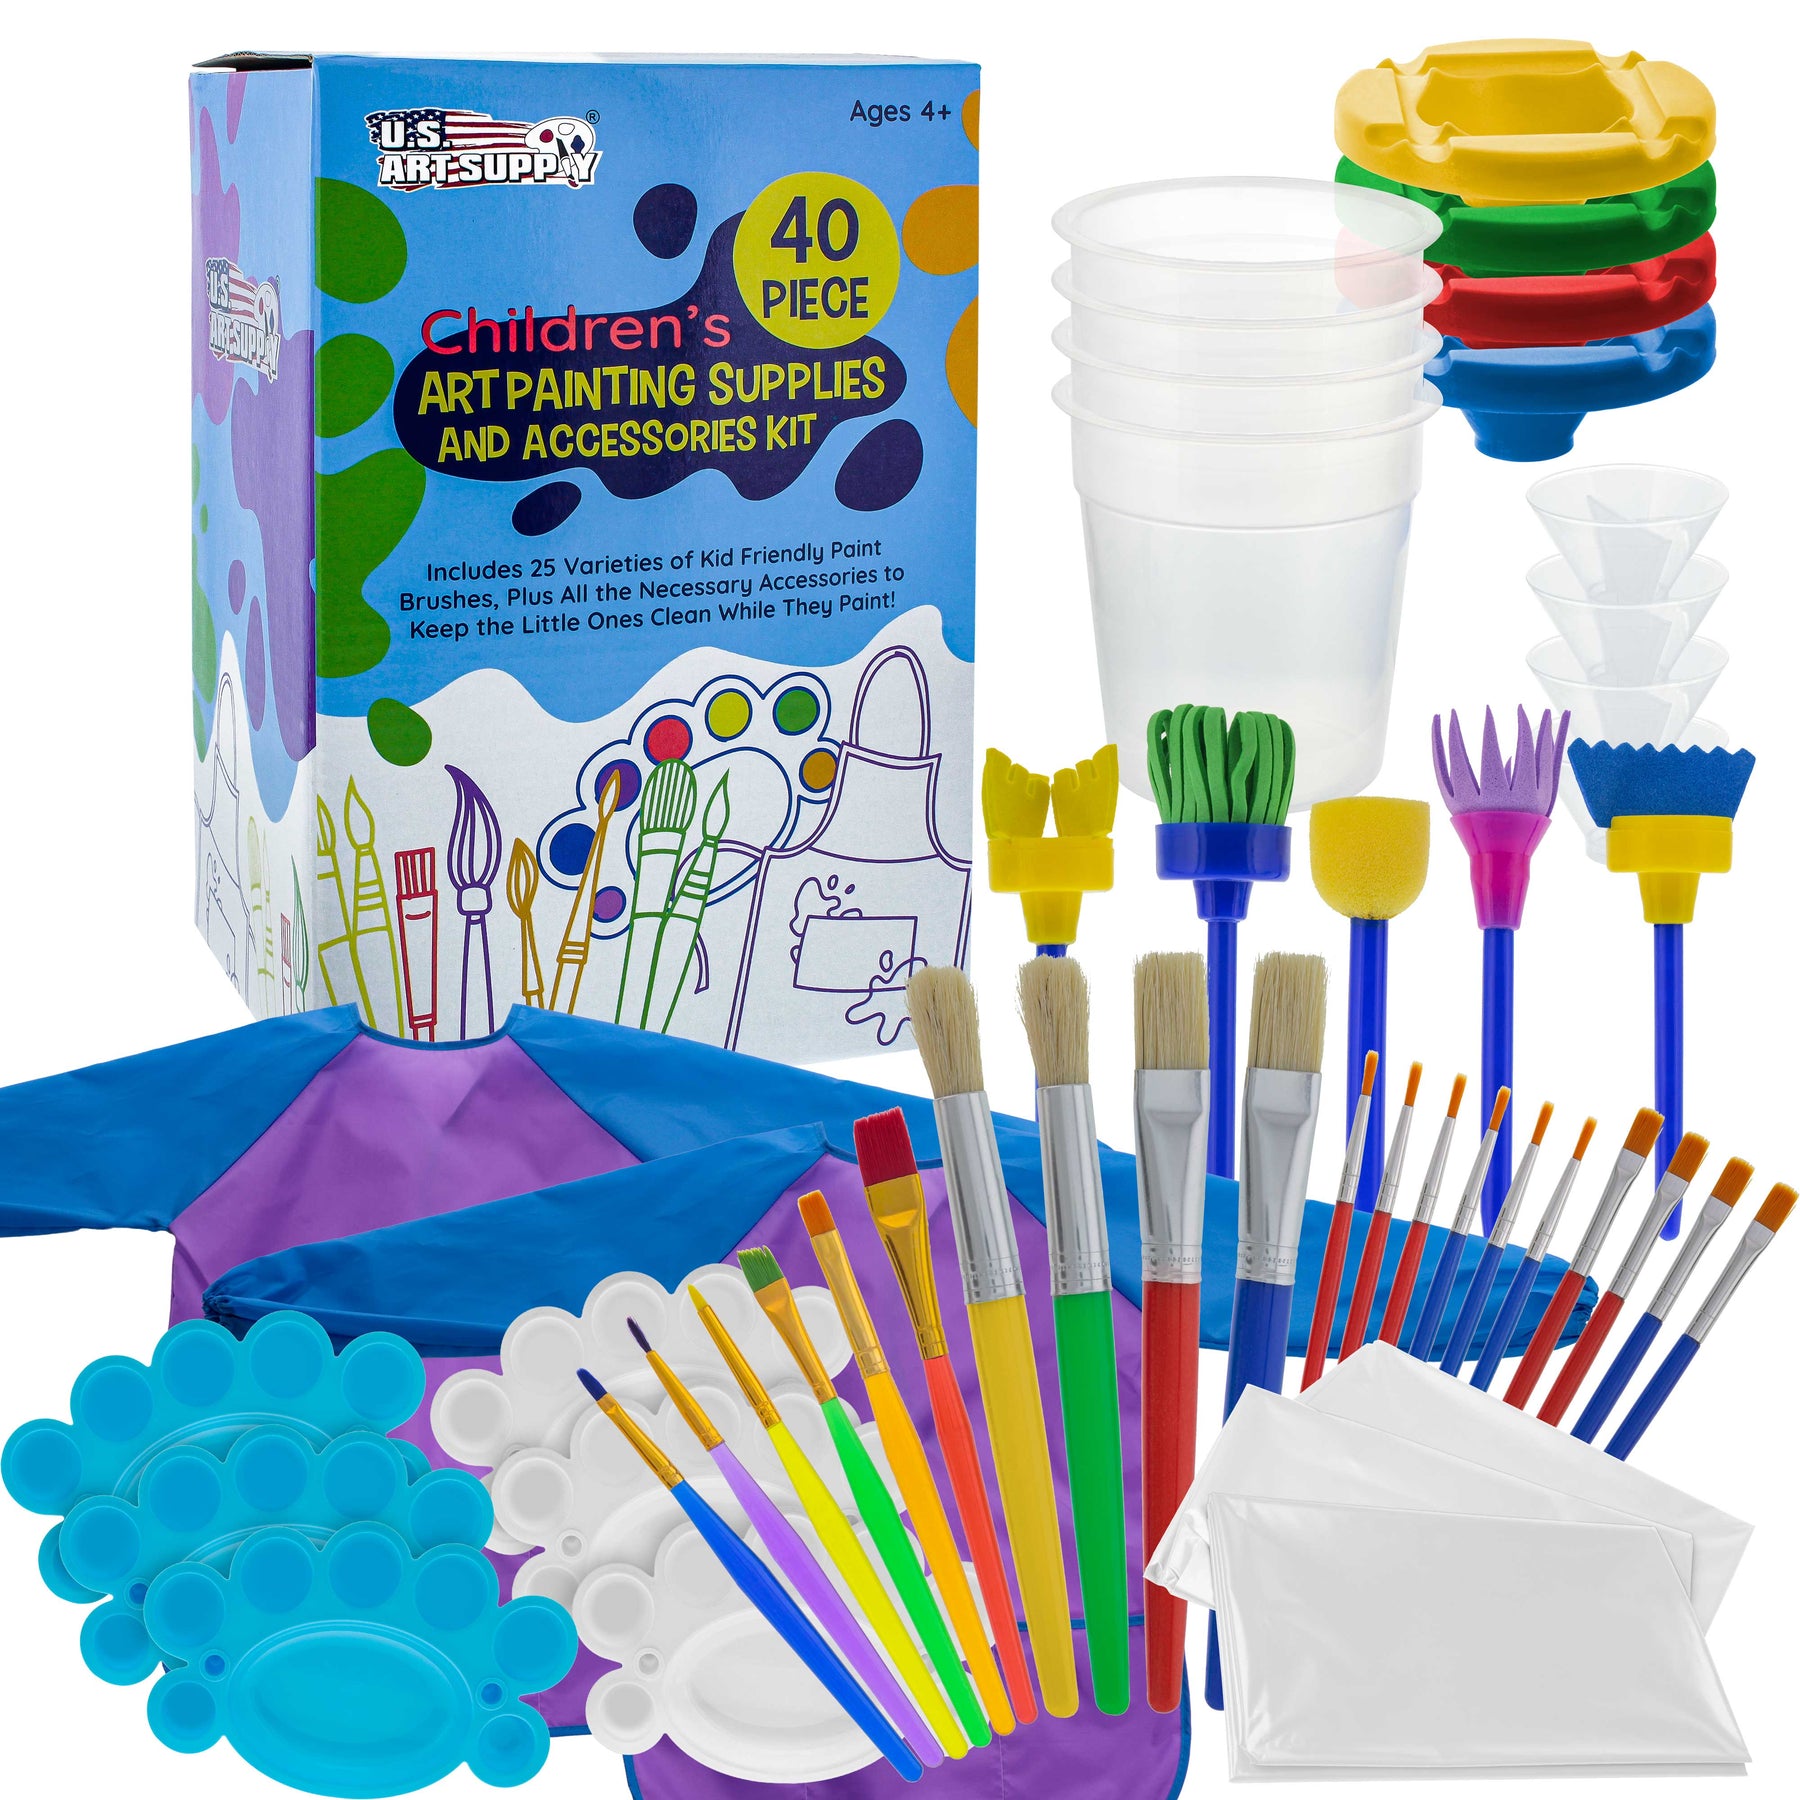 9 PCS NO Spill Paint Cups Set with Paint Brushes and Paint Tray